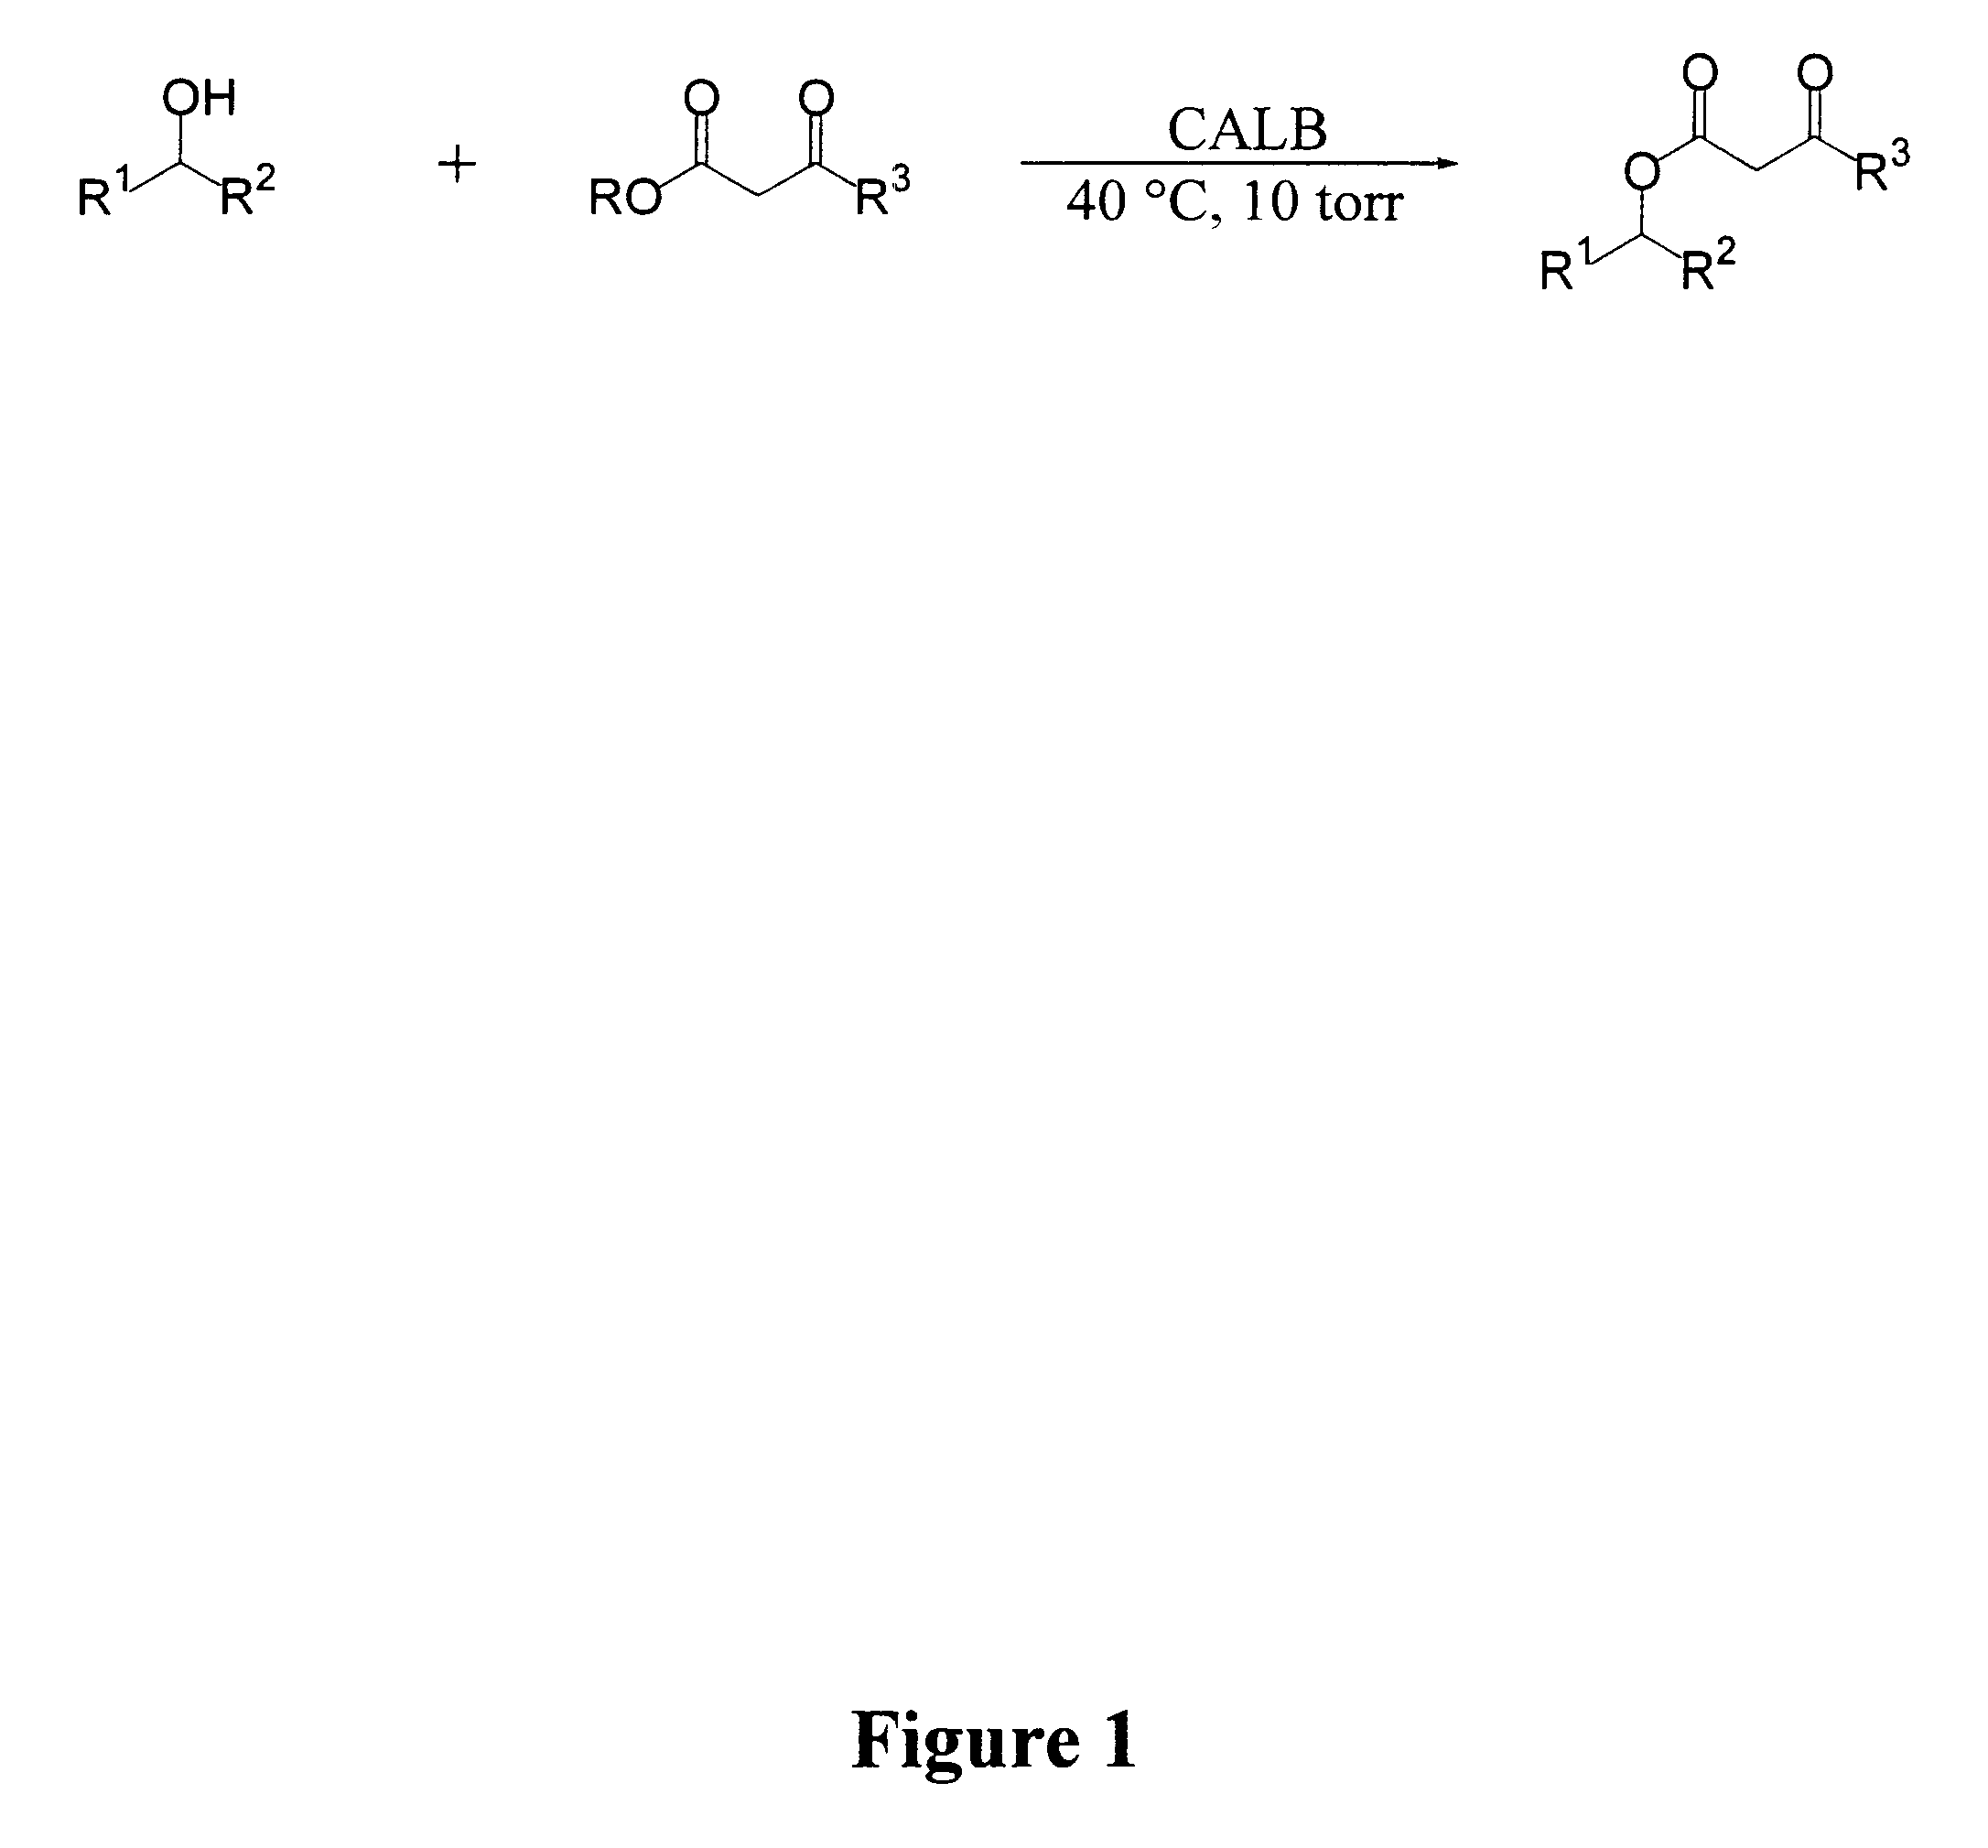 Synthesis of B-keto esters